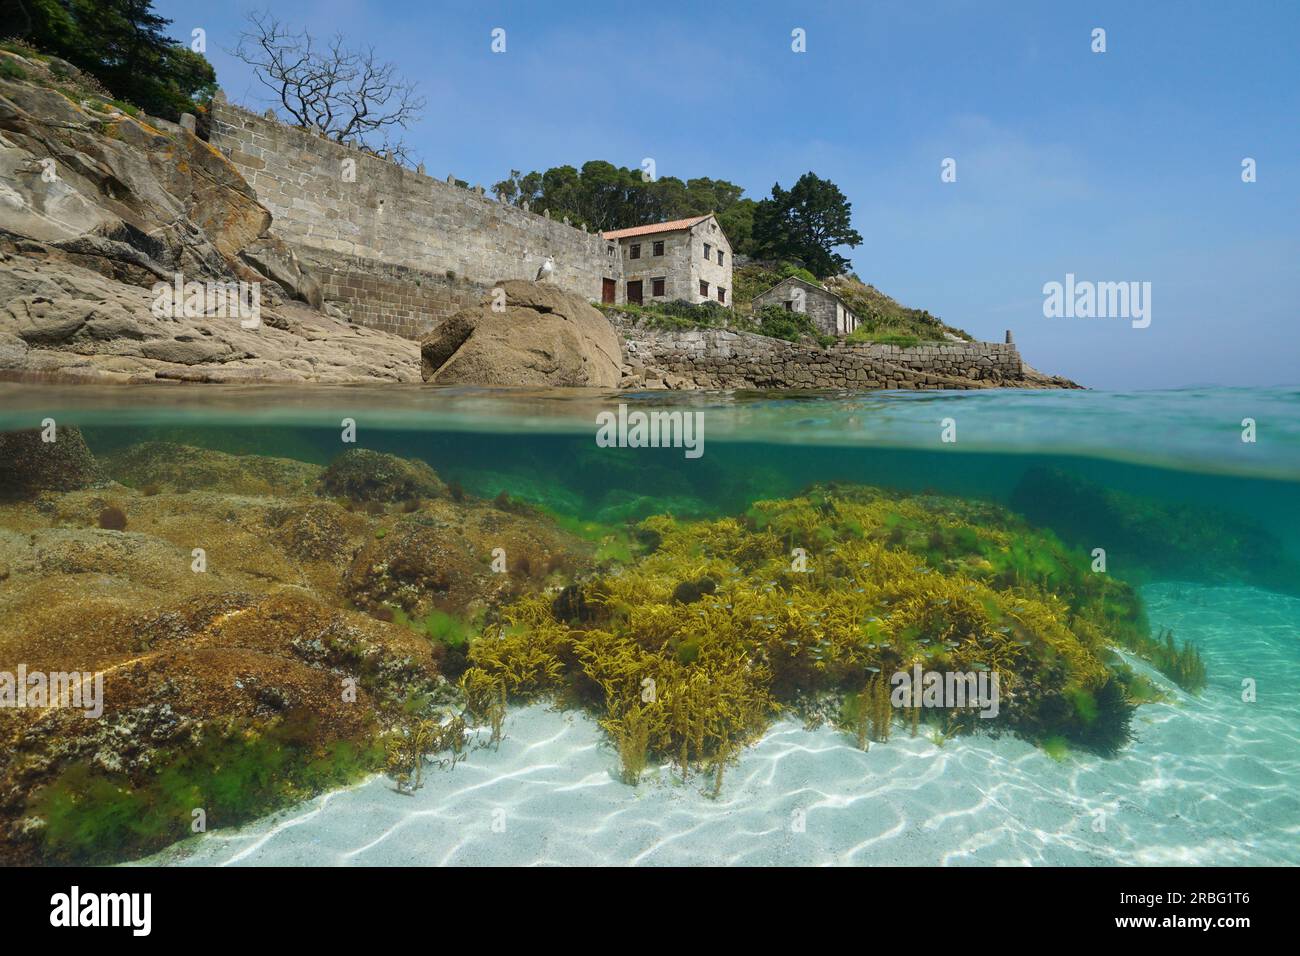 Old house with stone wall and slipway on the ocean shore, Atlantic coast in Spain, split level view over and under water surface, Galicia, Rias Baixas Stock Photo